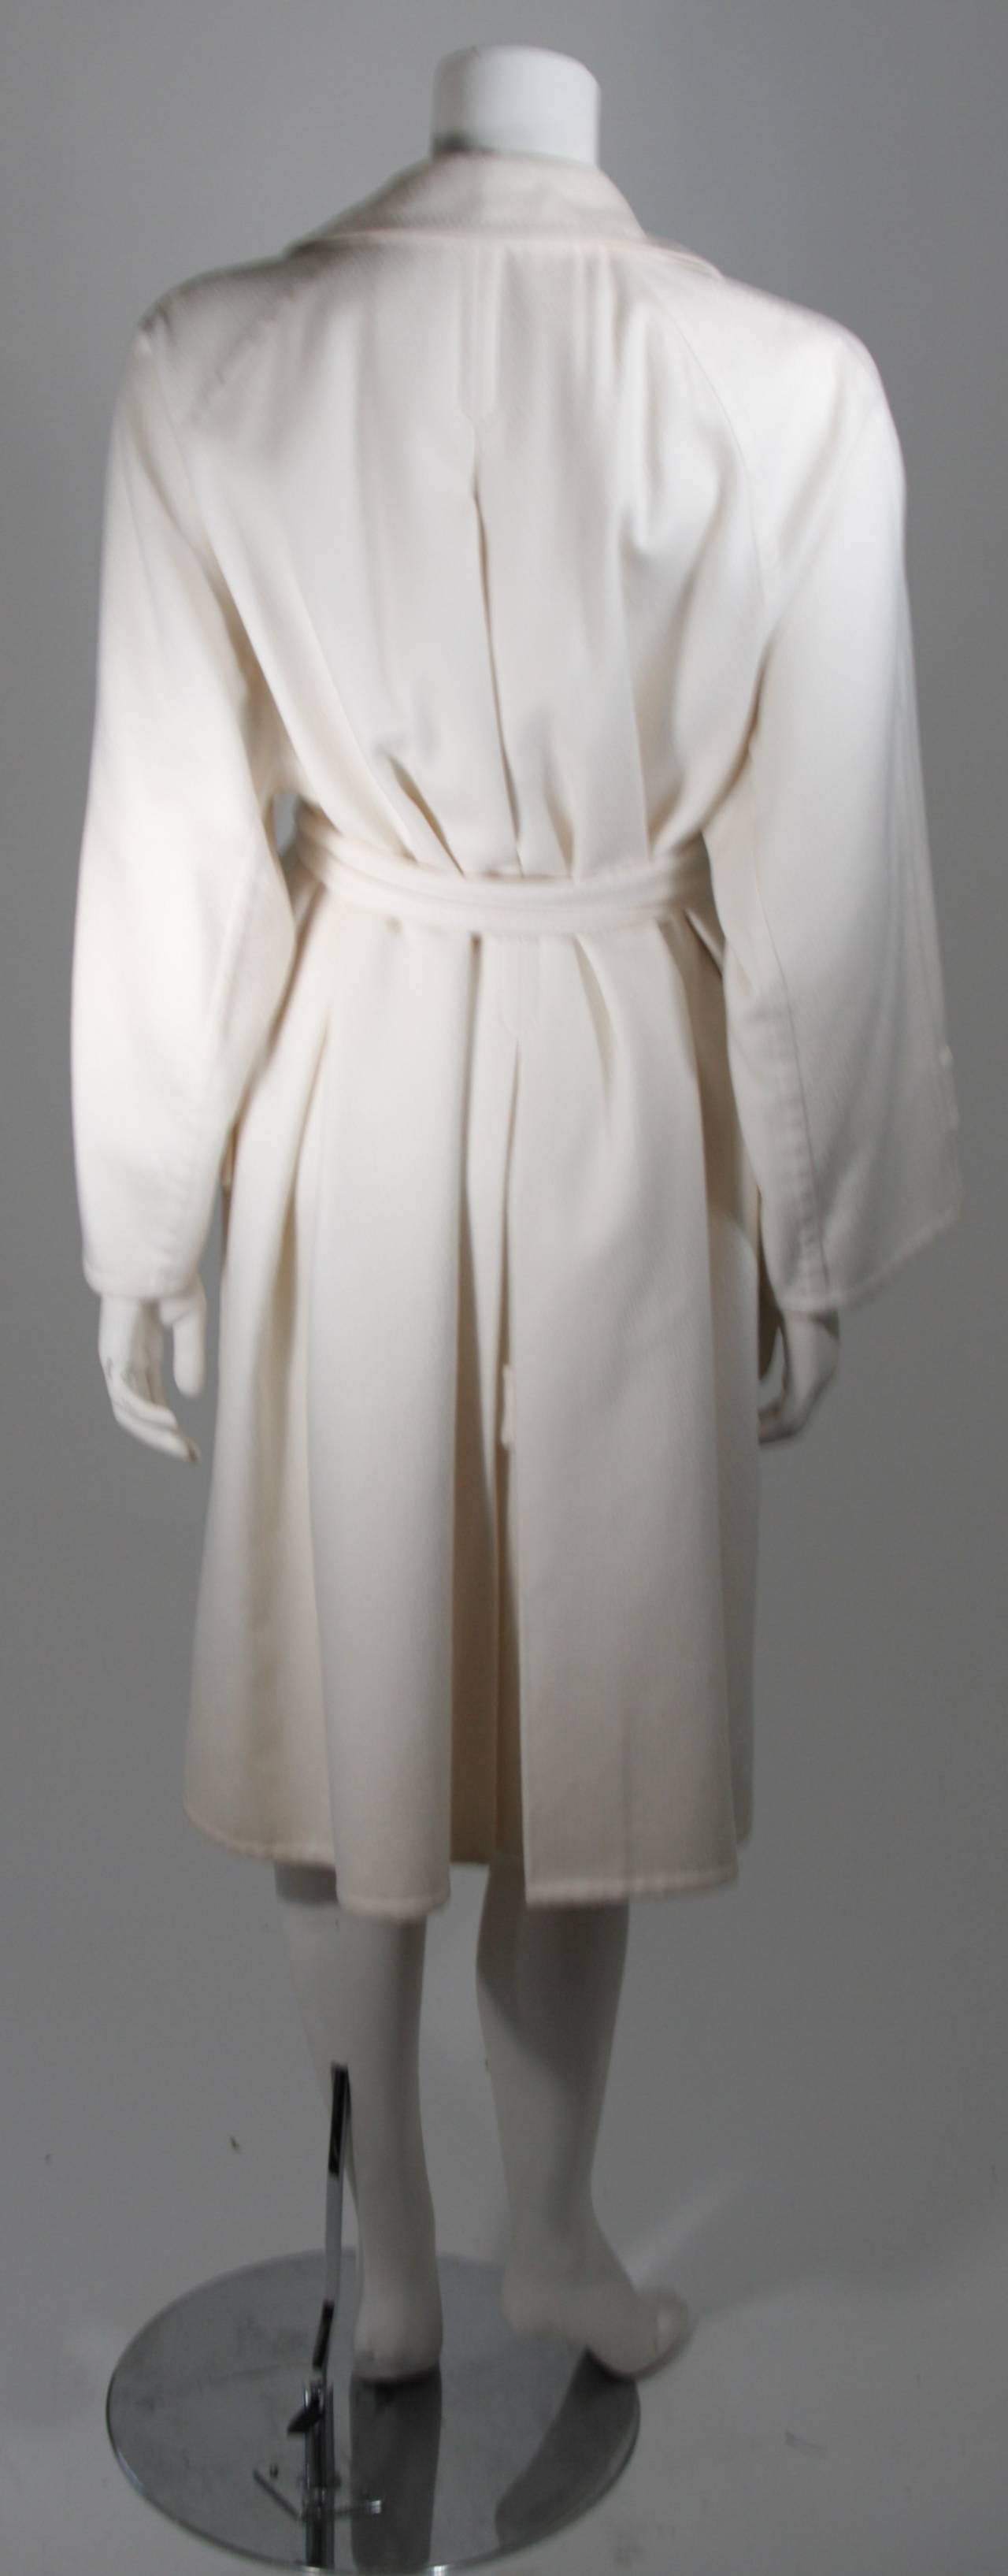 Yves Saint Laurent Cream/White Cashmere Belted Trench Coat NWT For Sale 1